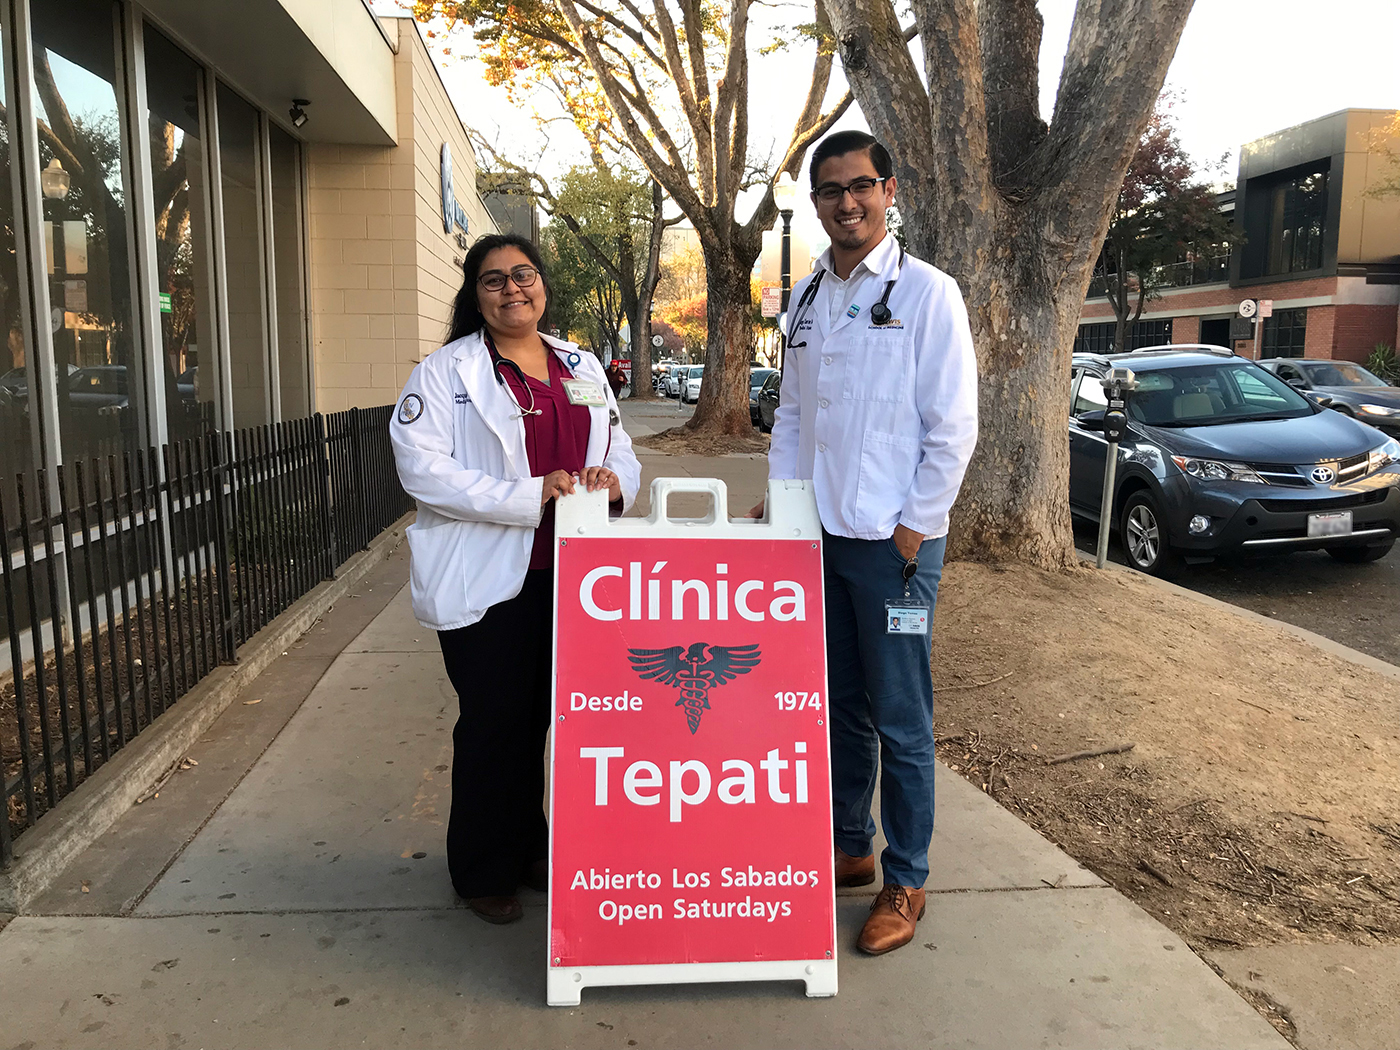 Jacqueline A. León, left, with another doctor, flanking an advertisement for the UC Davis Clínica Tepati